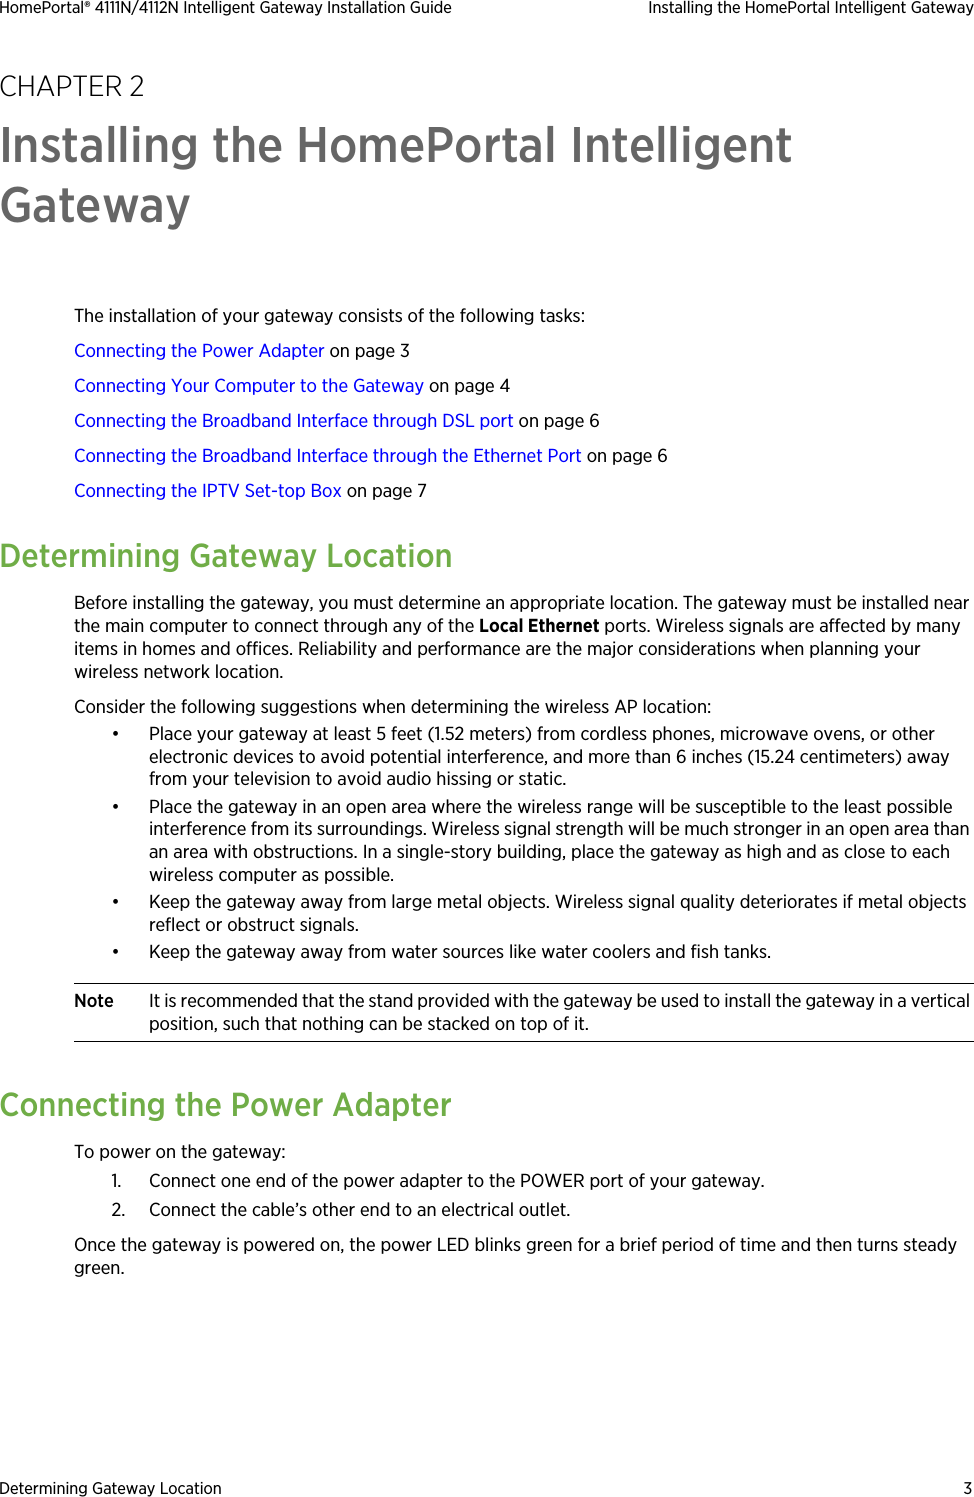 Determining Gateway Location 3HomePortal® 4111N/4112N Intelligent Gateway Installation Guide Installing the HomePortal Intelligent GatewayCHAPTER 2Installing the HomePortal Intelligent GatewayThe installation of your gateway consists of the following tasks:Connecting the Power Adapter on page 3Connecting Your Computer to the Gateway on page 4Connecting the Broadband Interface through DSL port on page 6Connecting the Broadband Interface through the Ethernet Port on page 6Connecting the IPTV Set-top Box on page 7Determining Gateway LocationBefore installing the gateway, you must determine an appropriate location. The gateway must be installed near the main computer to connect through any of the Local Ethernet ports. Wireless signals are affected by many items in homes and offices. Reliability and performance are the major considerations when planning your wireless network location. Consider the following suggestions when determining the wireless AP location:• Place your gateway at least 5 feet (1.52 meters) from cordless phones, microwave ovens, or other electronic devices to avoid potential interference, and more than 6 inches (15.24 centimeters) away from your television to avoid audio hissing or static.• Place the gateway in an open area where the wireless range will be susceptible to the least possible interference from its surroundings. Wireless signal strength will be much stronger in an open area than an area with obstructions. In a single-story building, place the gateway as high and as close to each wireless computer as possible.• Keep the gateway away from large metal objects. Wireless signal quality deteriorates if metal objects reflect or obstruct signals.• Keep the gateway away from water sources like water coolers and fish tanks.Note It is recommended that the stand provided with the gateway be used to install the gateway in a vertical position, such that nothing can be stacked on top of it. Connecting the Power AdapterTo power on the gateway:1. Connect one end of the power adapter to the POWER port of your gateway.2. Connect the cable’s other end to an electrical outlet. Once the gateway is powered on, the power LED blinks green for a brief period of time and then turns steady green.